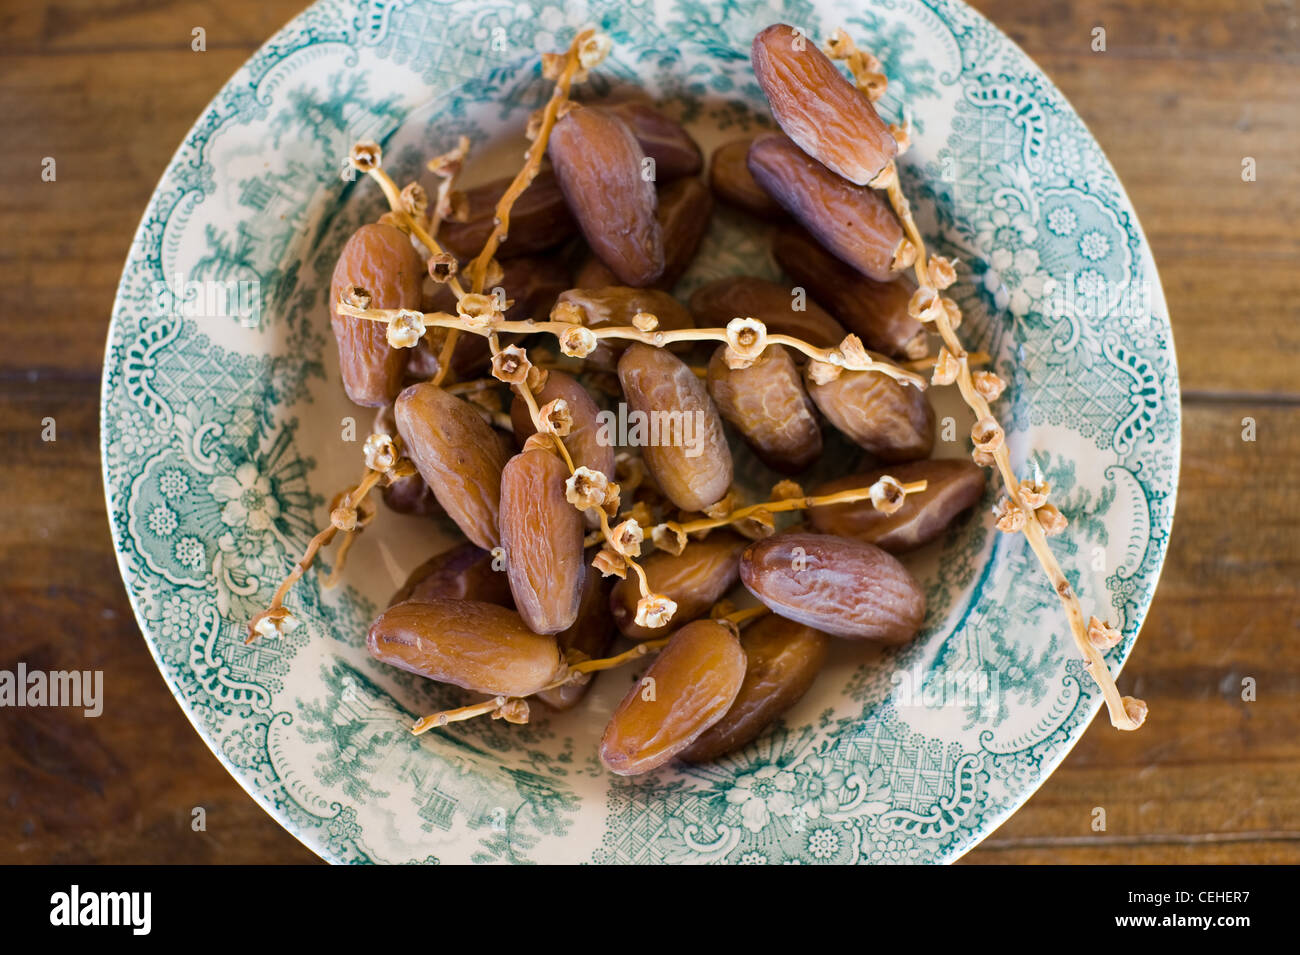 Dried dates in a bowl on a wooden table Stock Photo